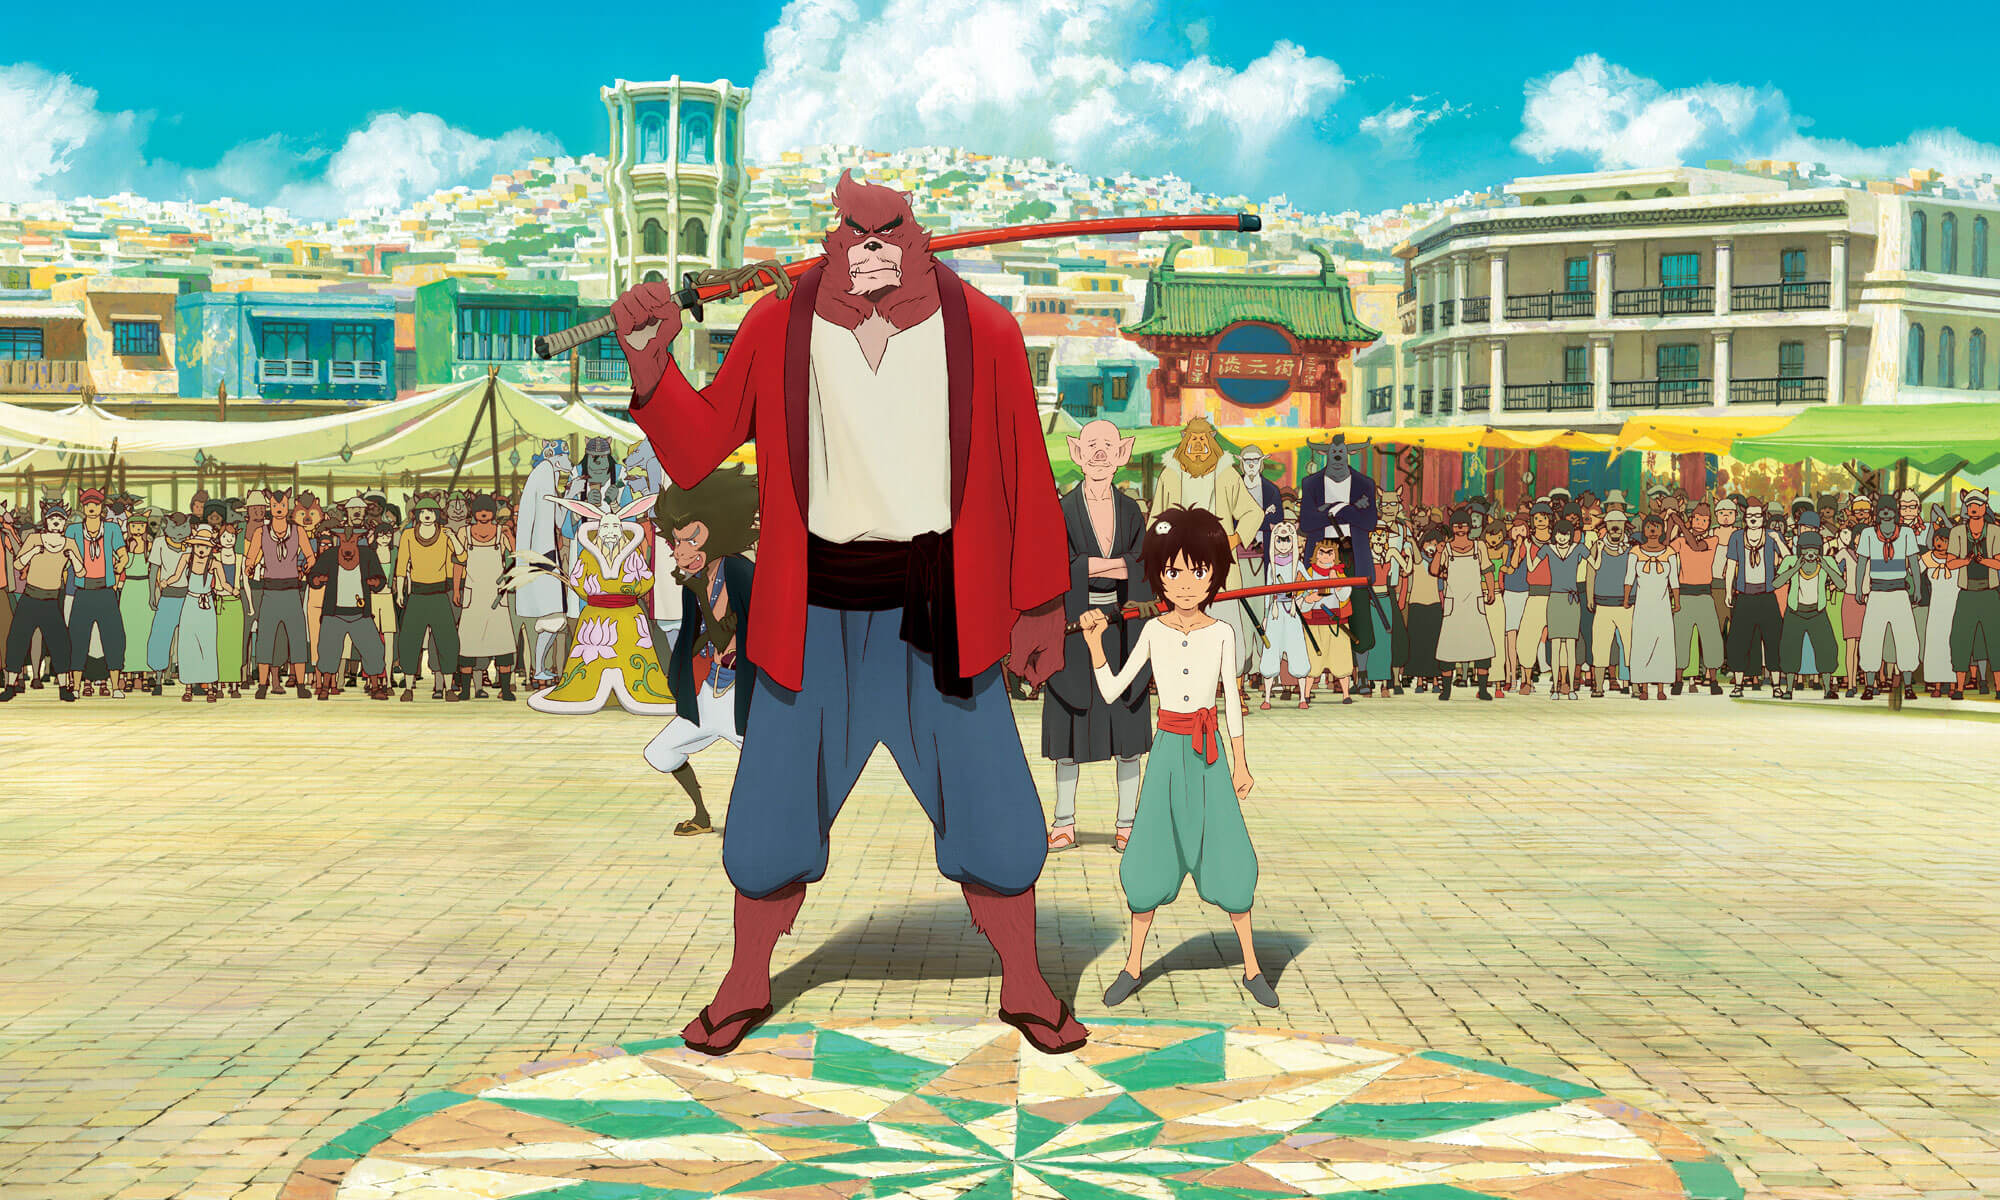 The Boy And The Beast Backgrounds, Compatible - PC, Mobile, Gadgets| 2000x1200 px